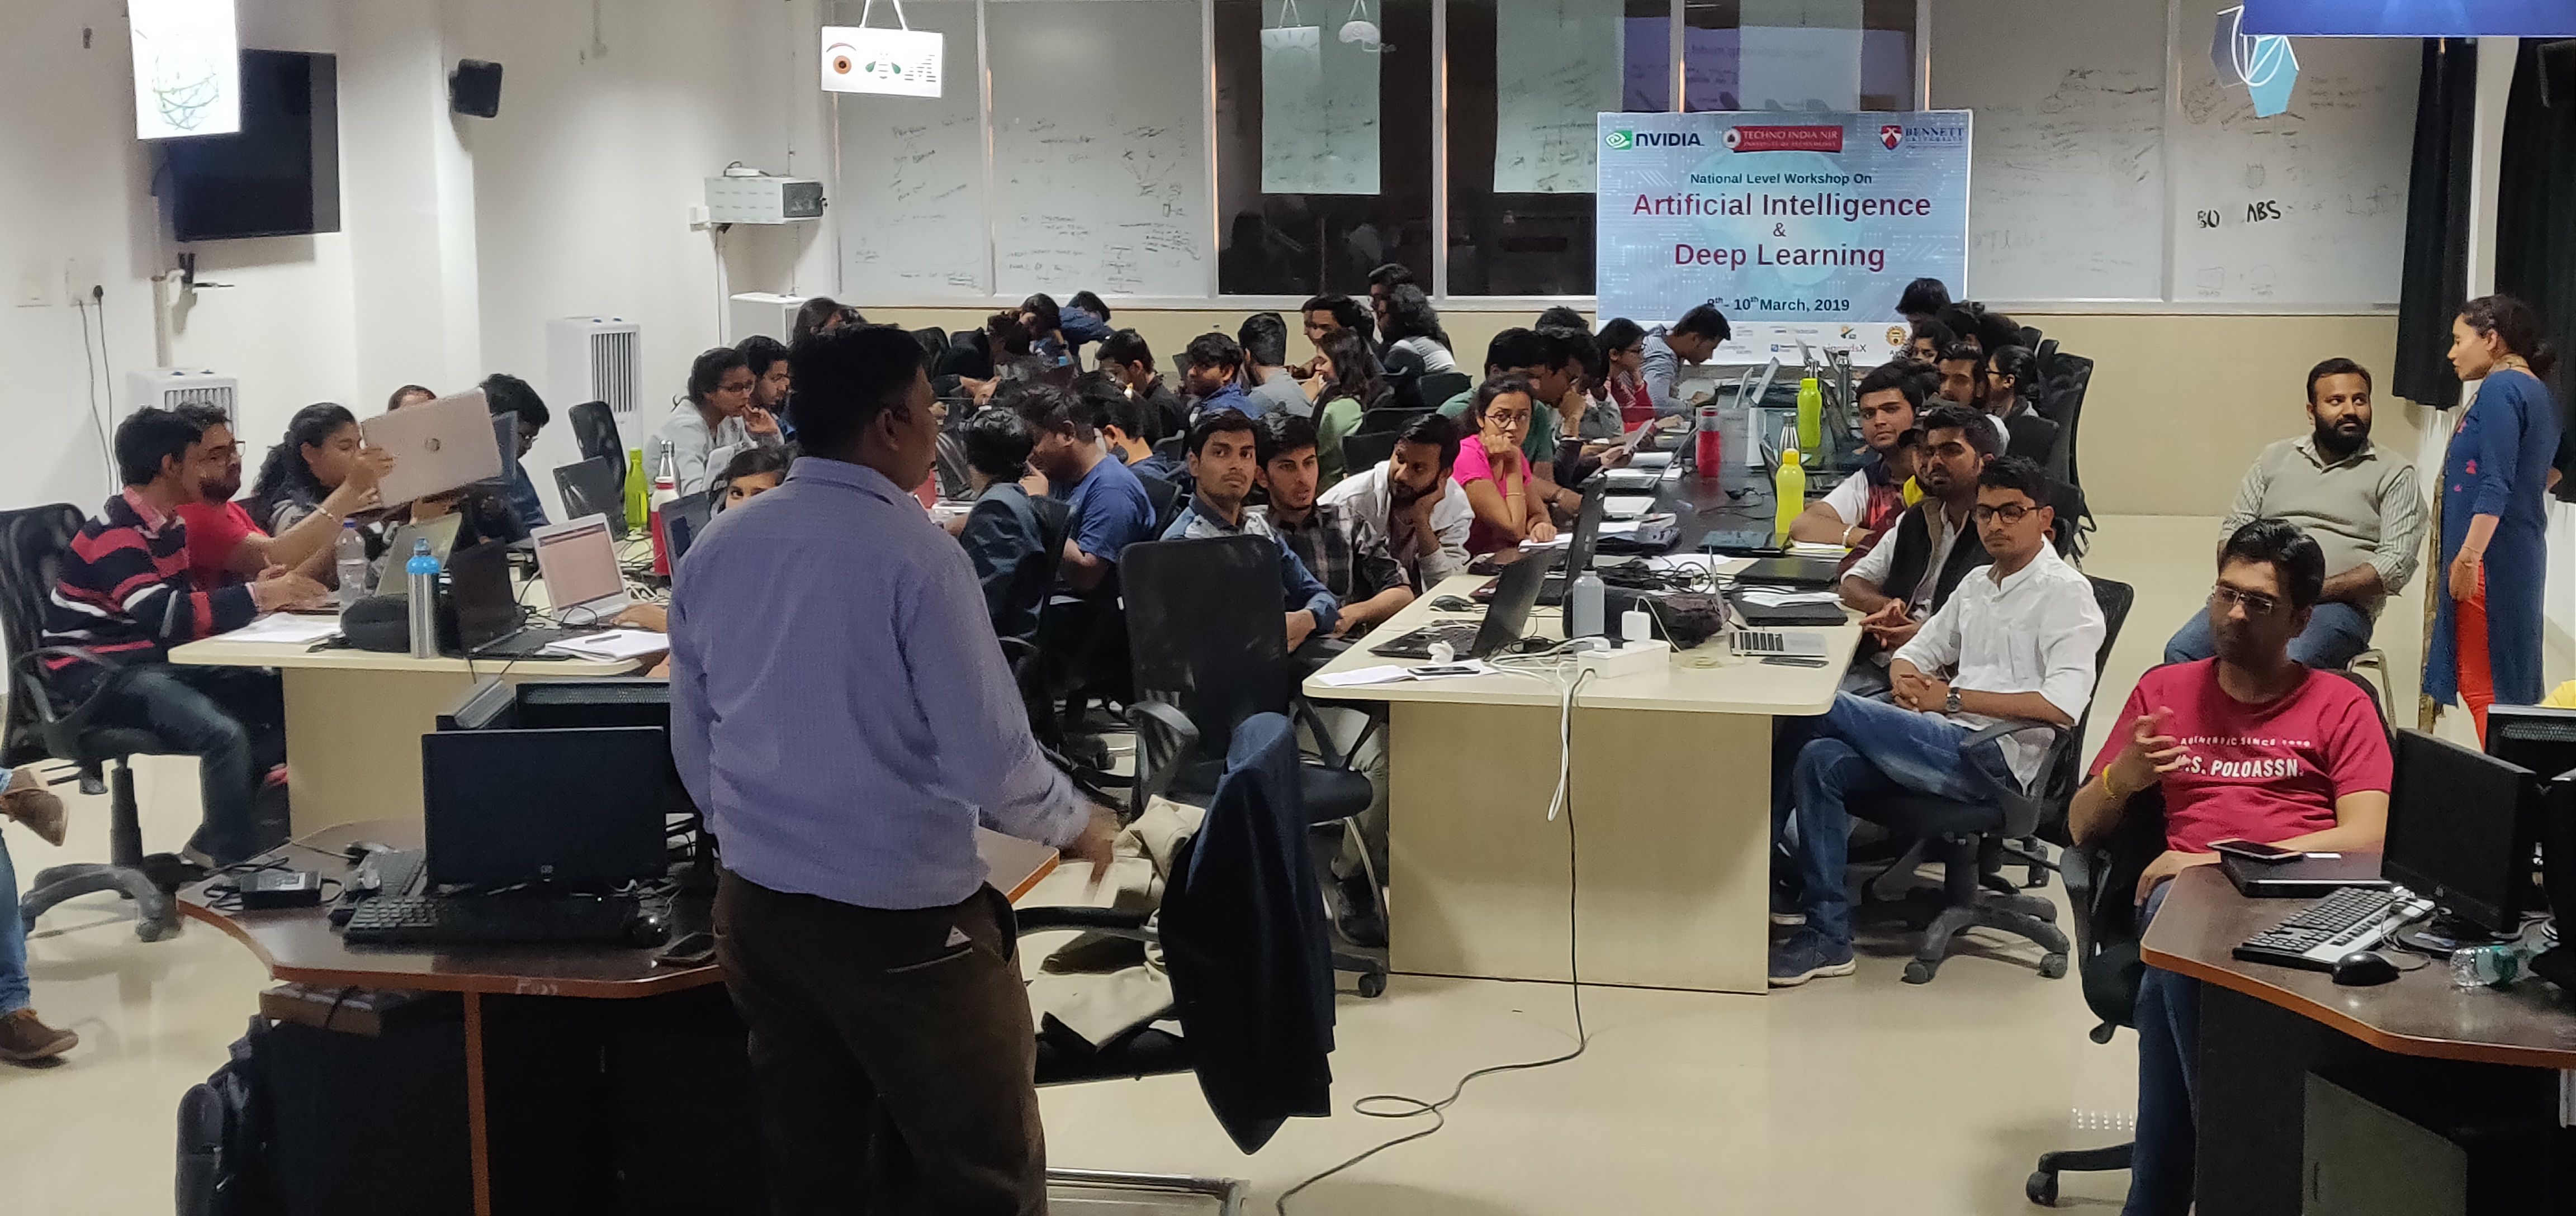 Techno India NJR Conducts 3 days National Level Workshop on AI & Deep Learning in collaboration with NVIDIA